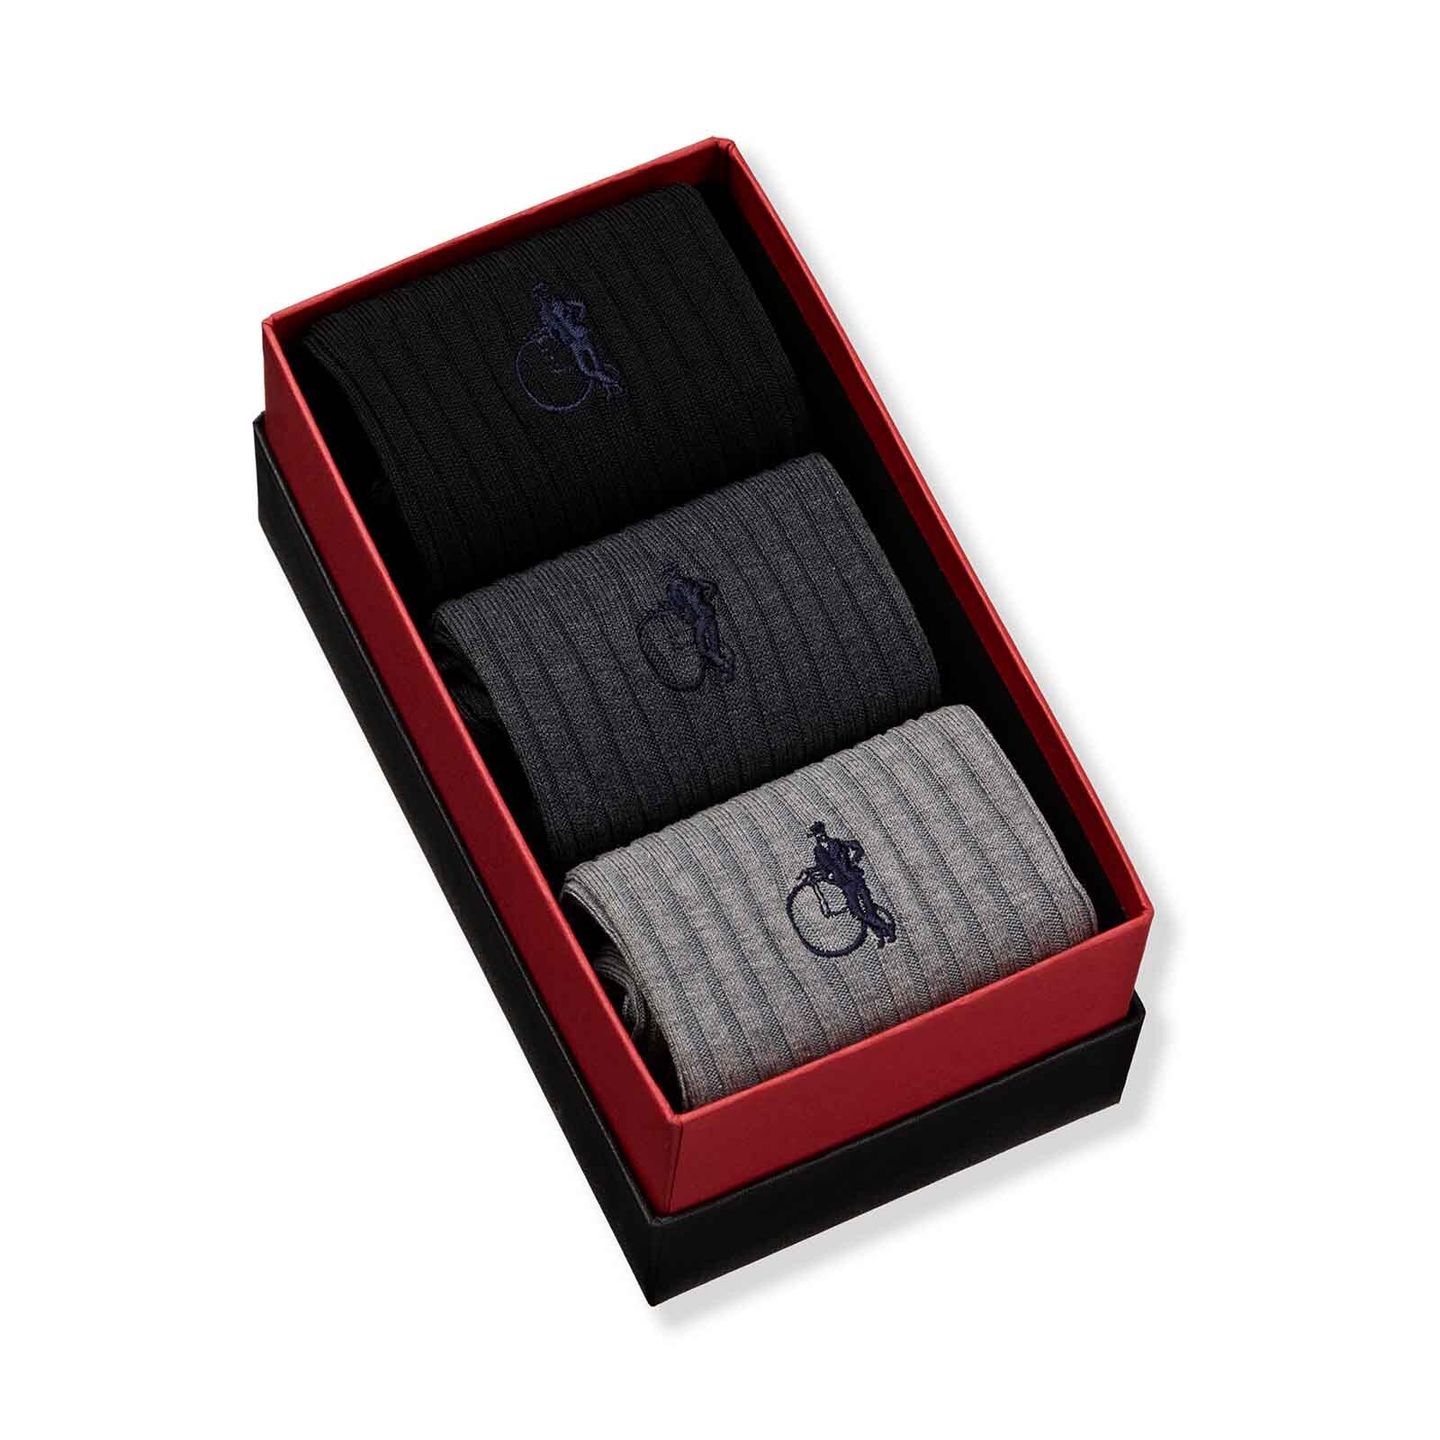 3 pairs of socks in black and grey in a presentation box